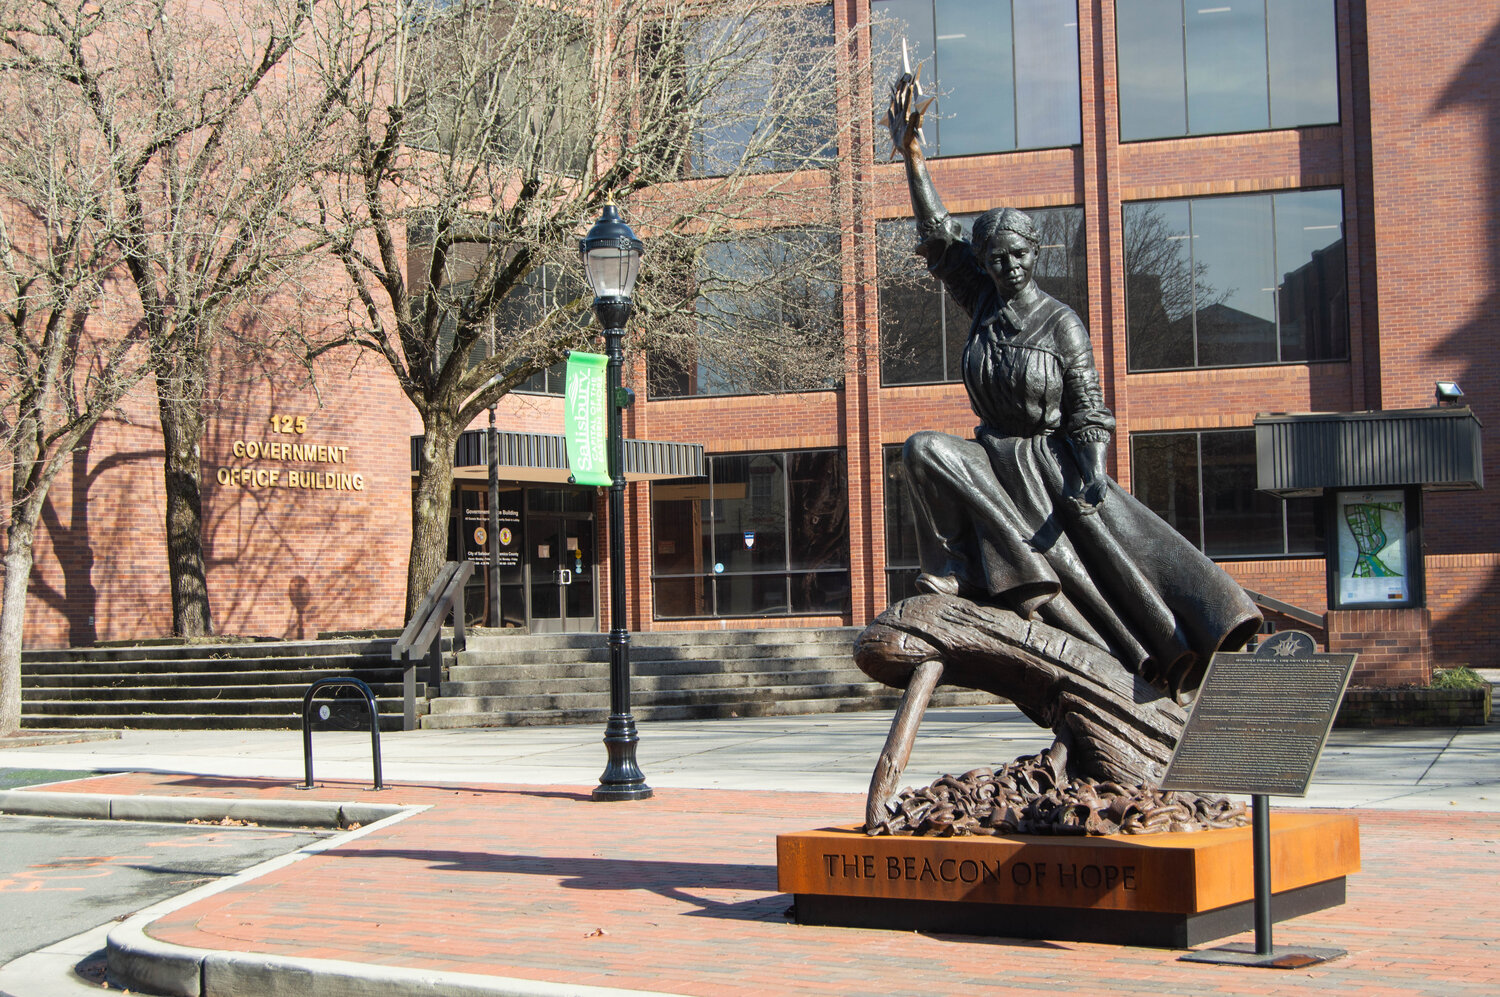 The City of Salisbury will say farewell to the Beacon of Hope statue on Wednesday.